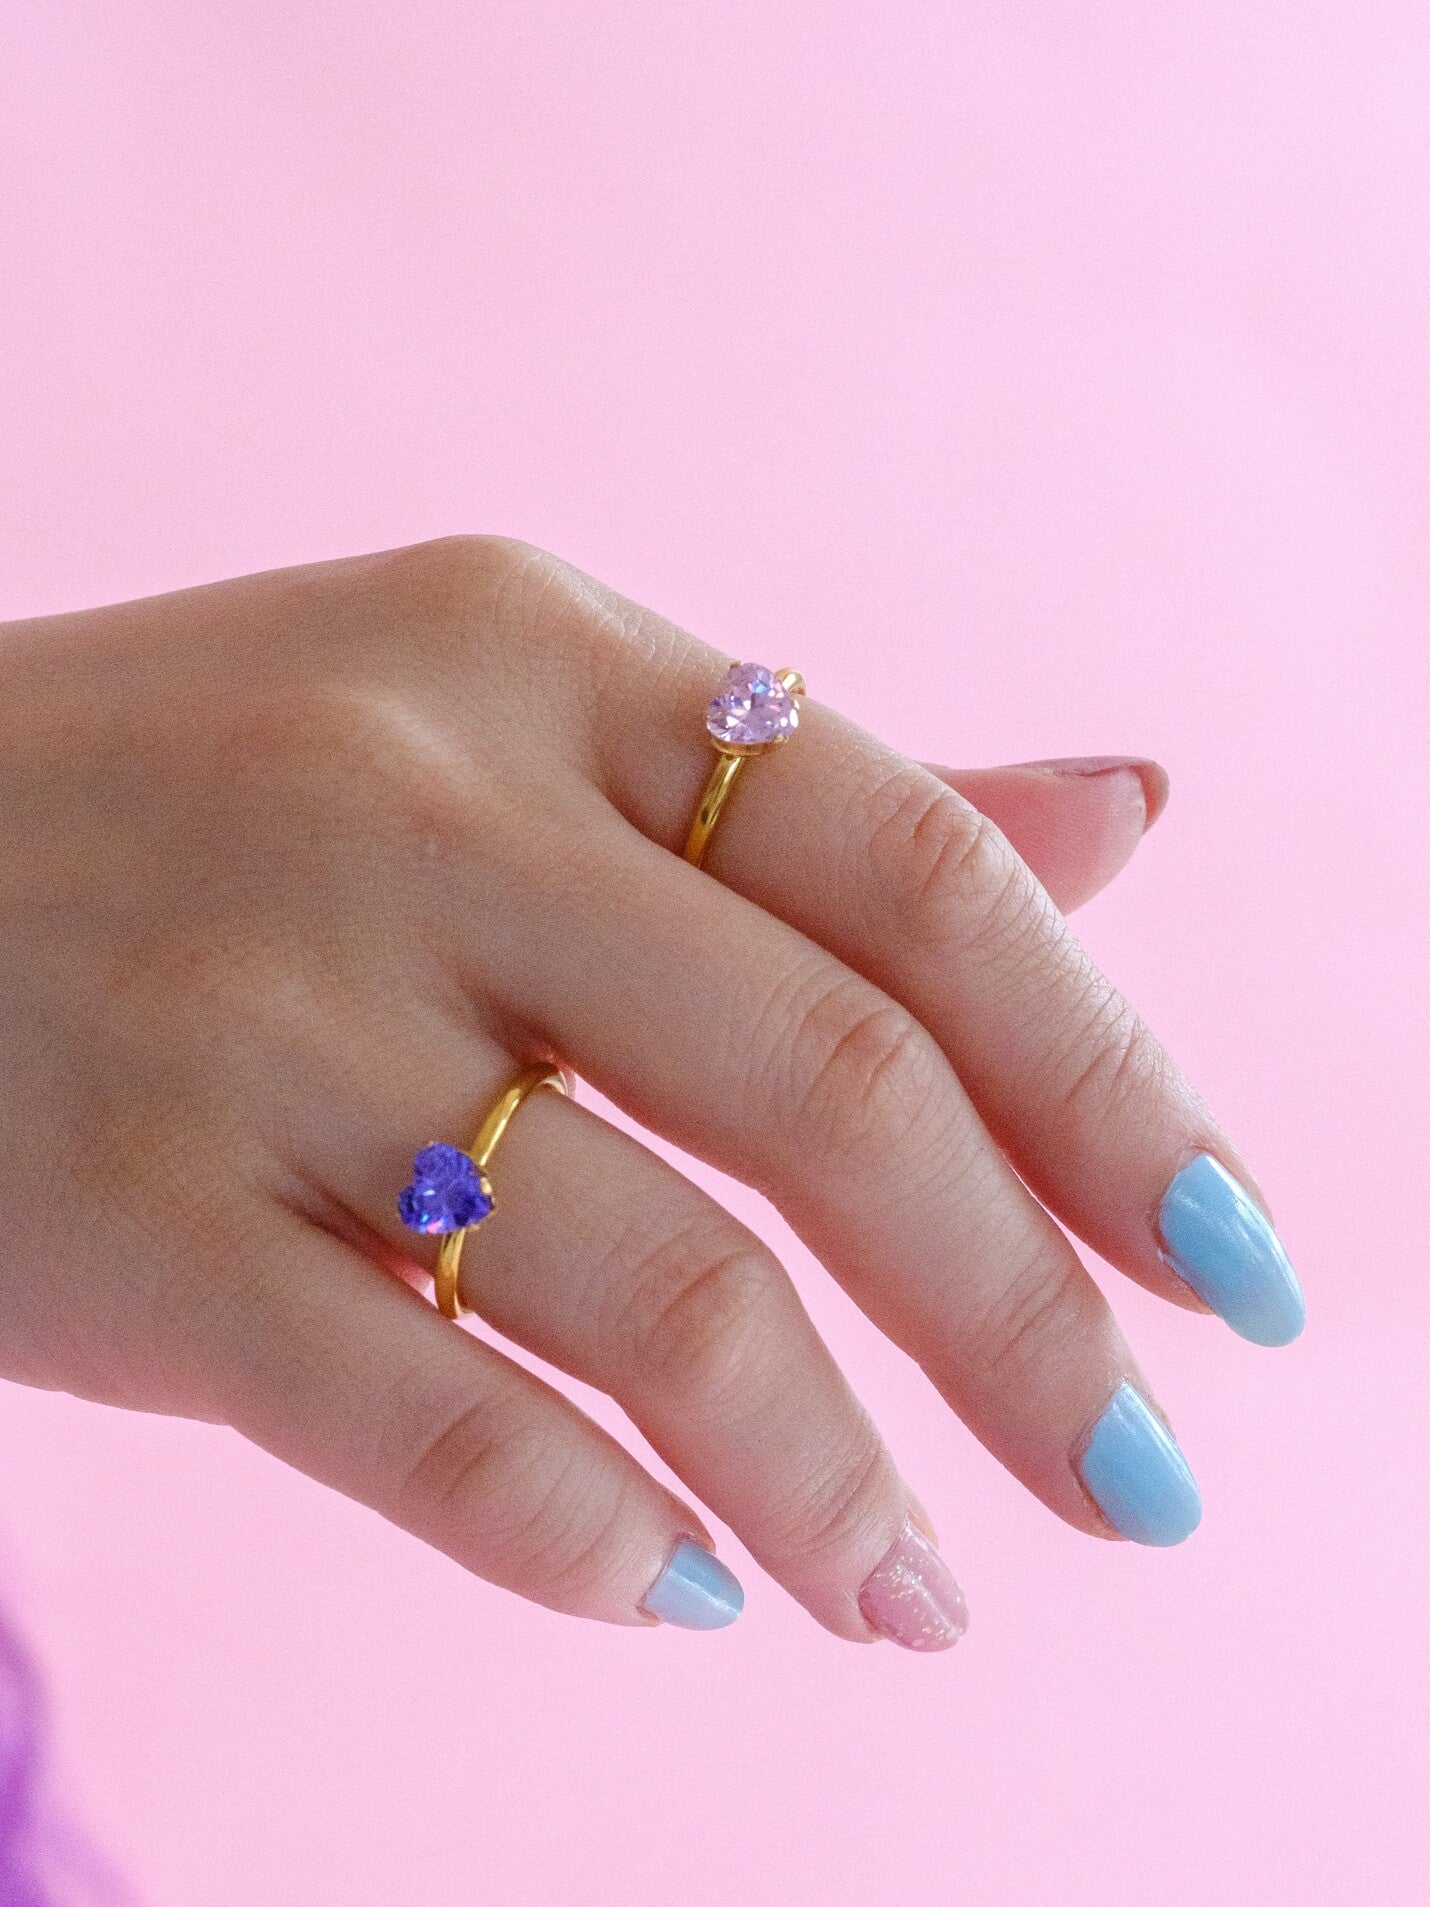 Woman's hand wearing two gold band rings. One ring has a purple heart shaped gen and the other has a pale pink heart shaped gem